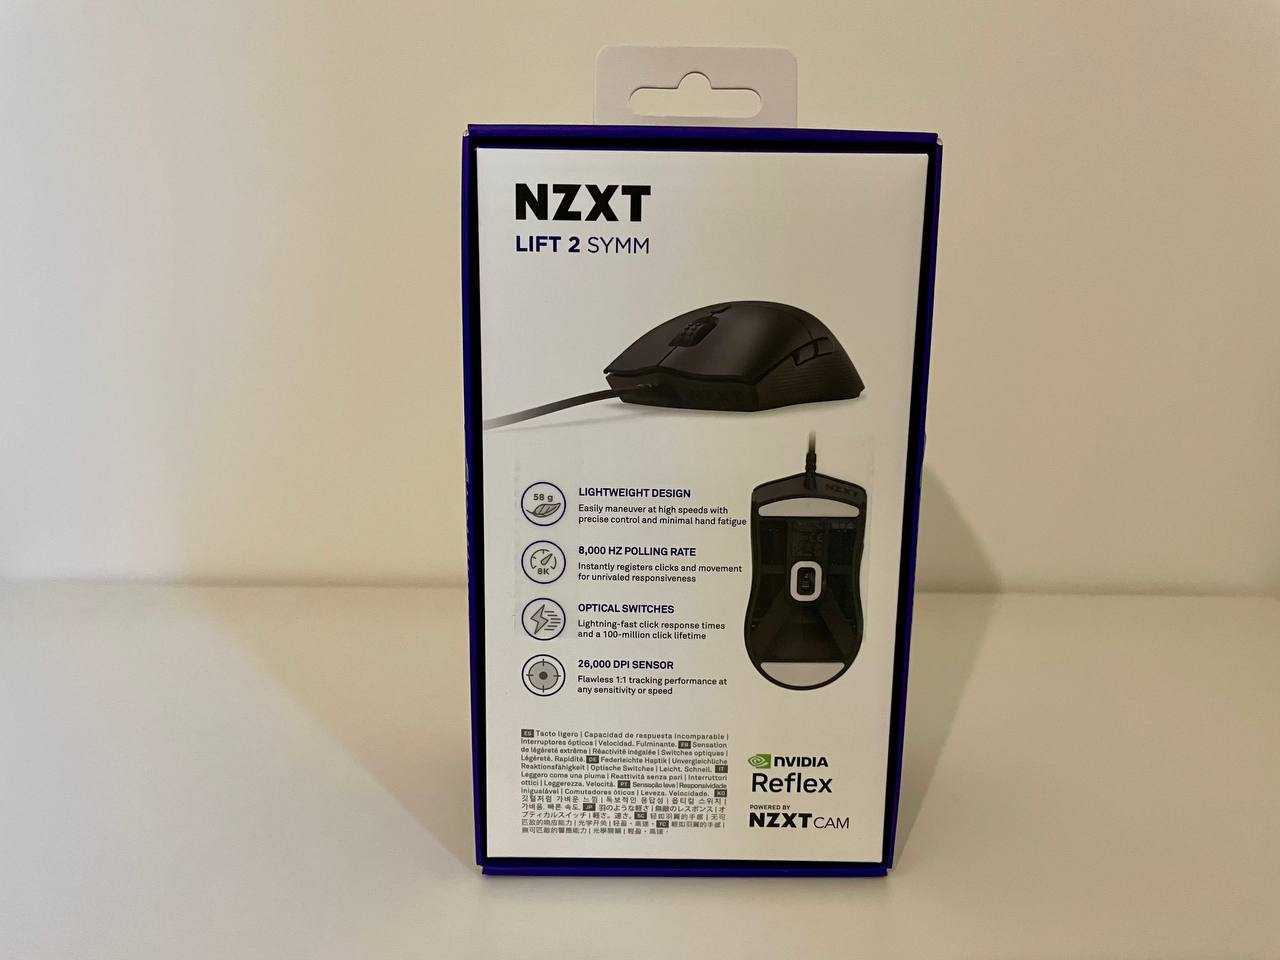 NZXT Lift 2 Symm review: super light gaming mouse!